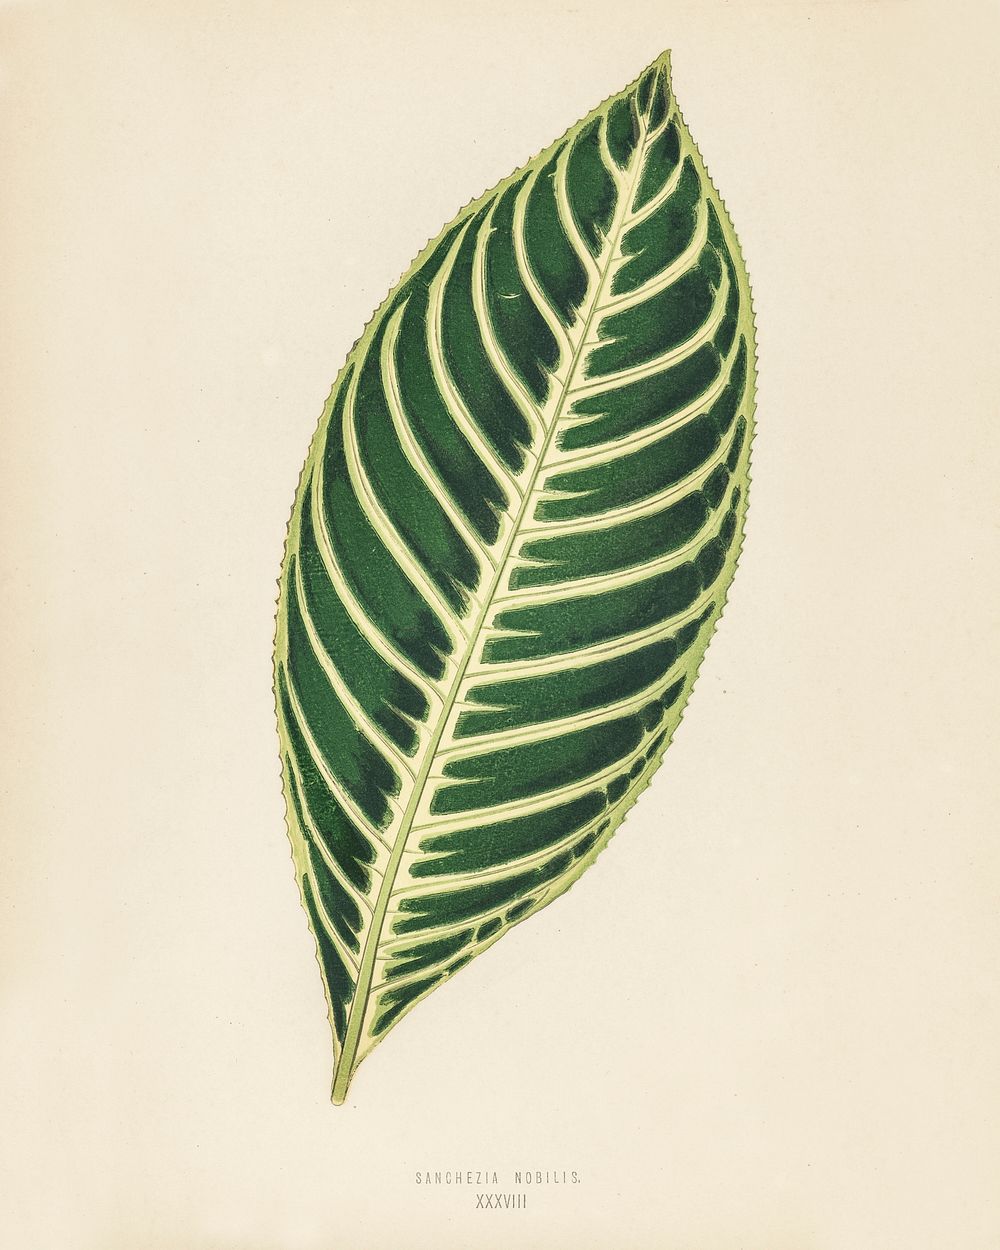 Tiger Plant (Sanchezia Nobilis). Digitally enhanced from our own 1929 edition of New and Rare Beautiful-Leaved Plants by…